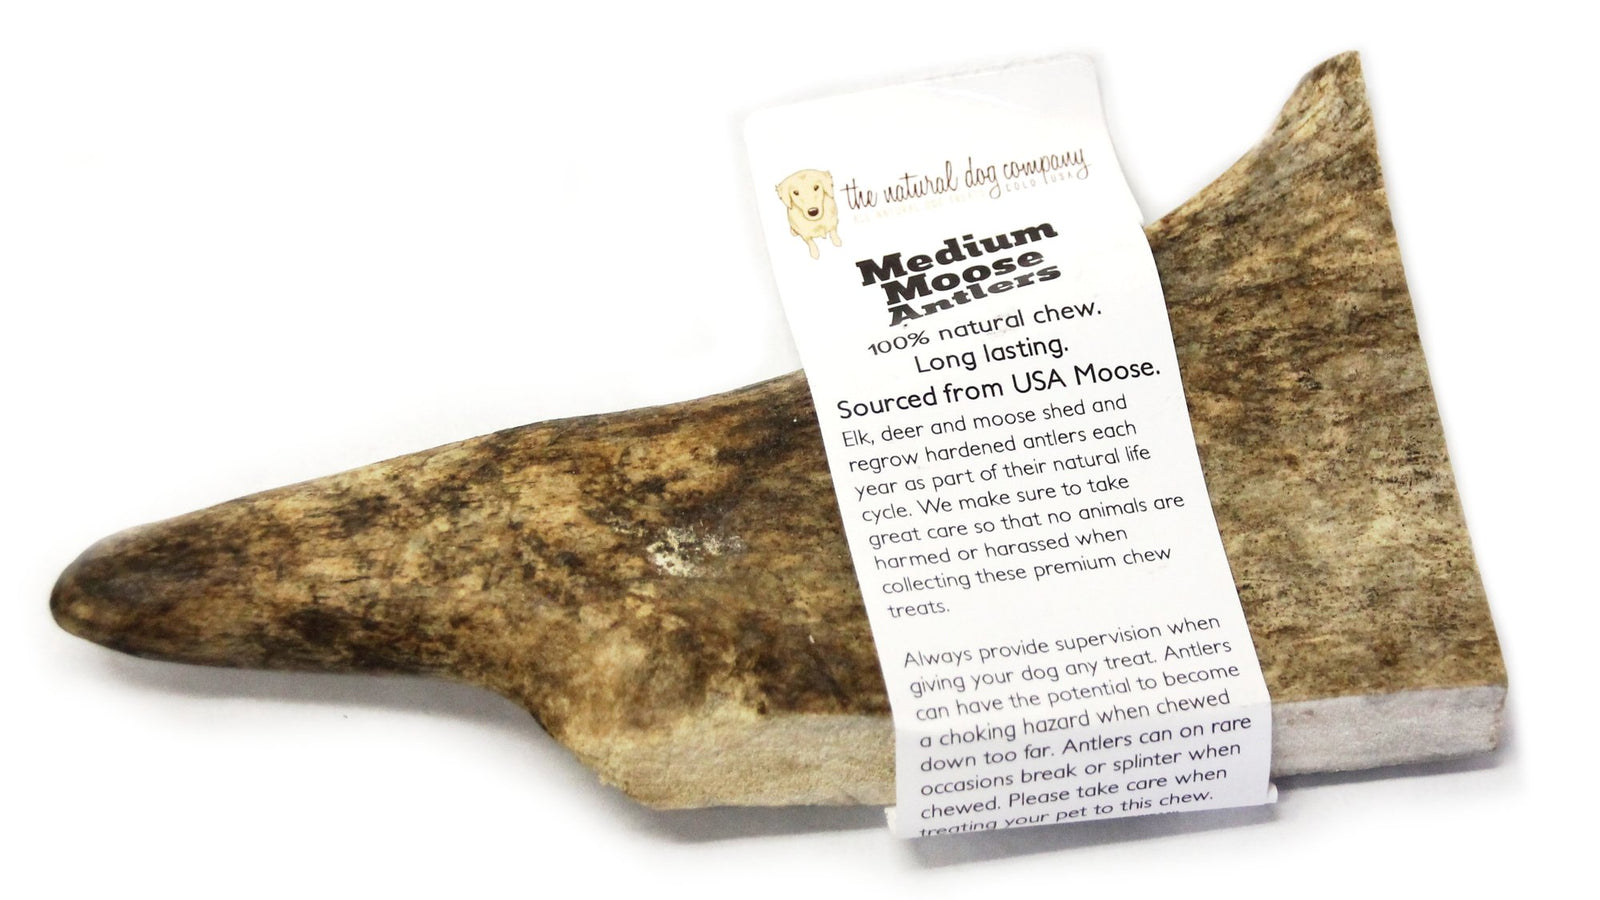 Tuesday's Natural Dog Company Moose Antler Dog Chew